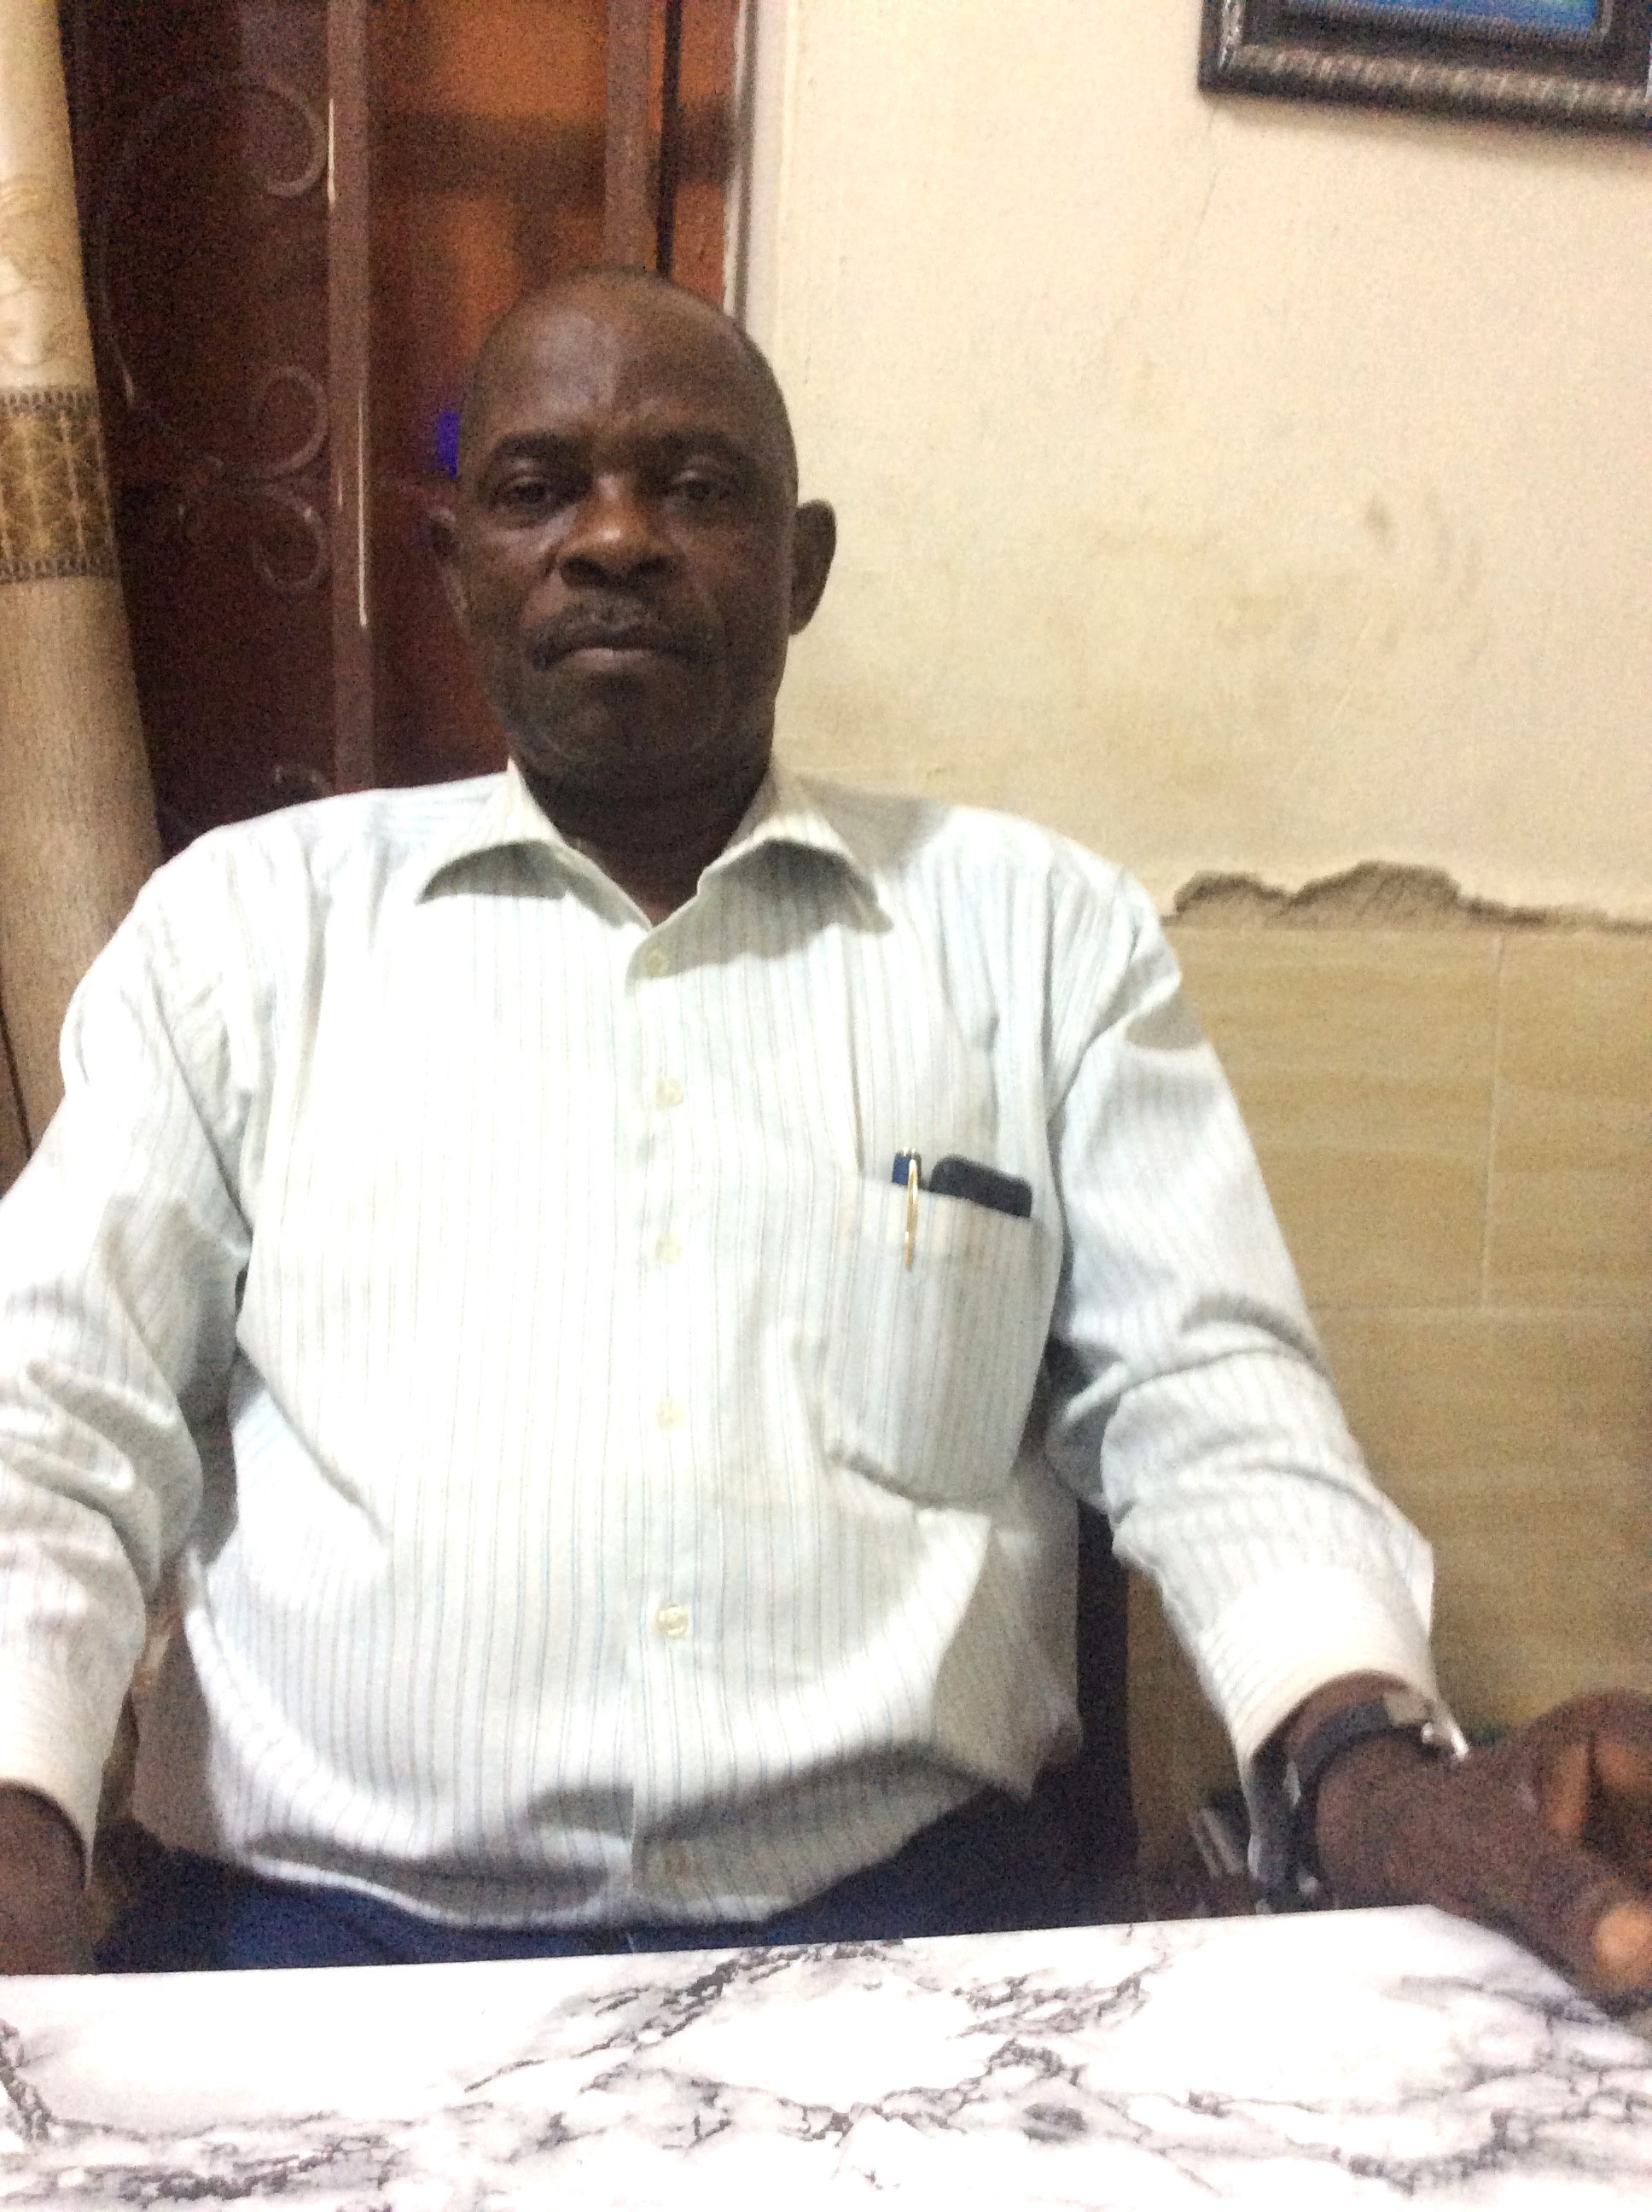  The Rev. Abraham Damina Dumus, head of the CAN Bauchi State Chapter. (Christian Daily International-Morning Star News)